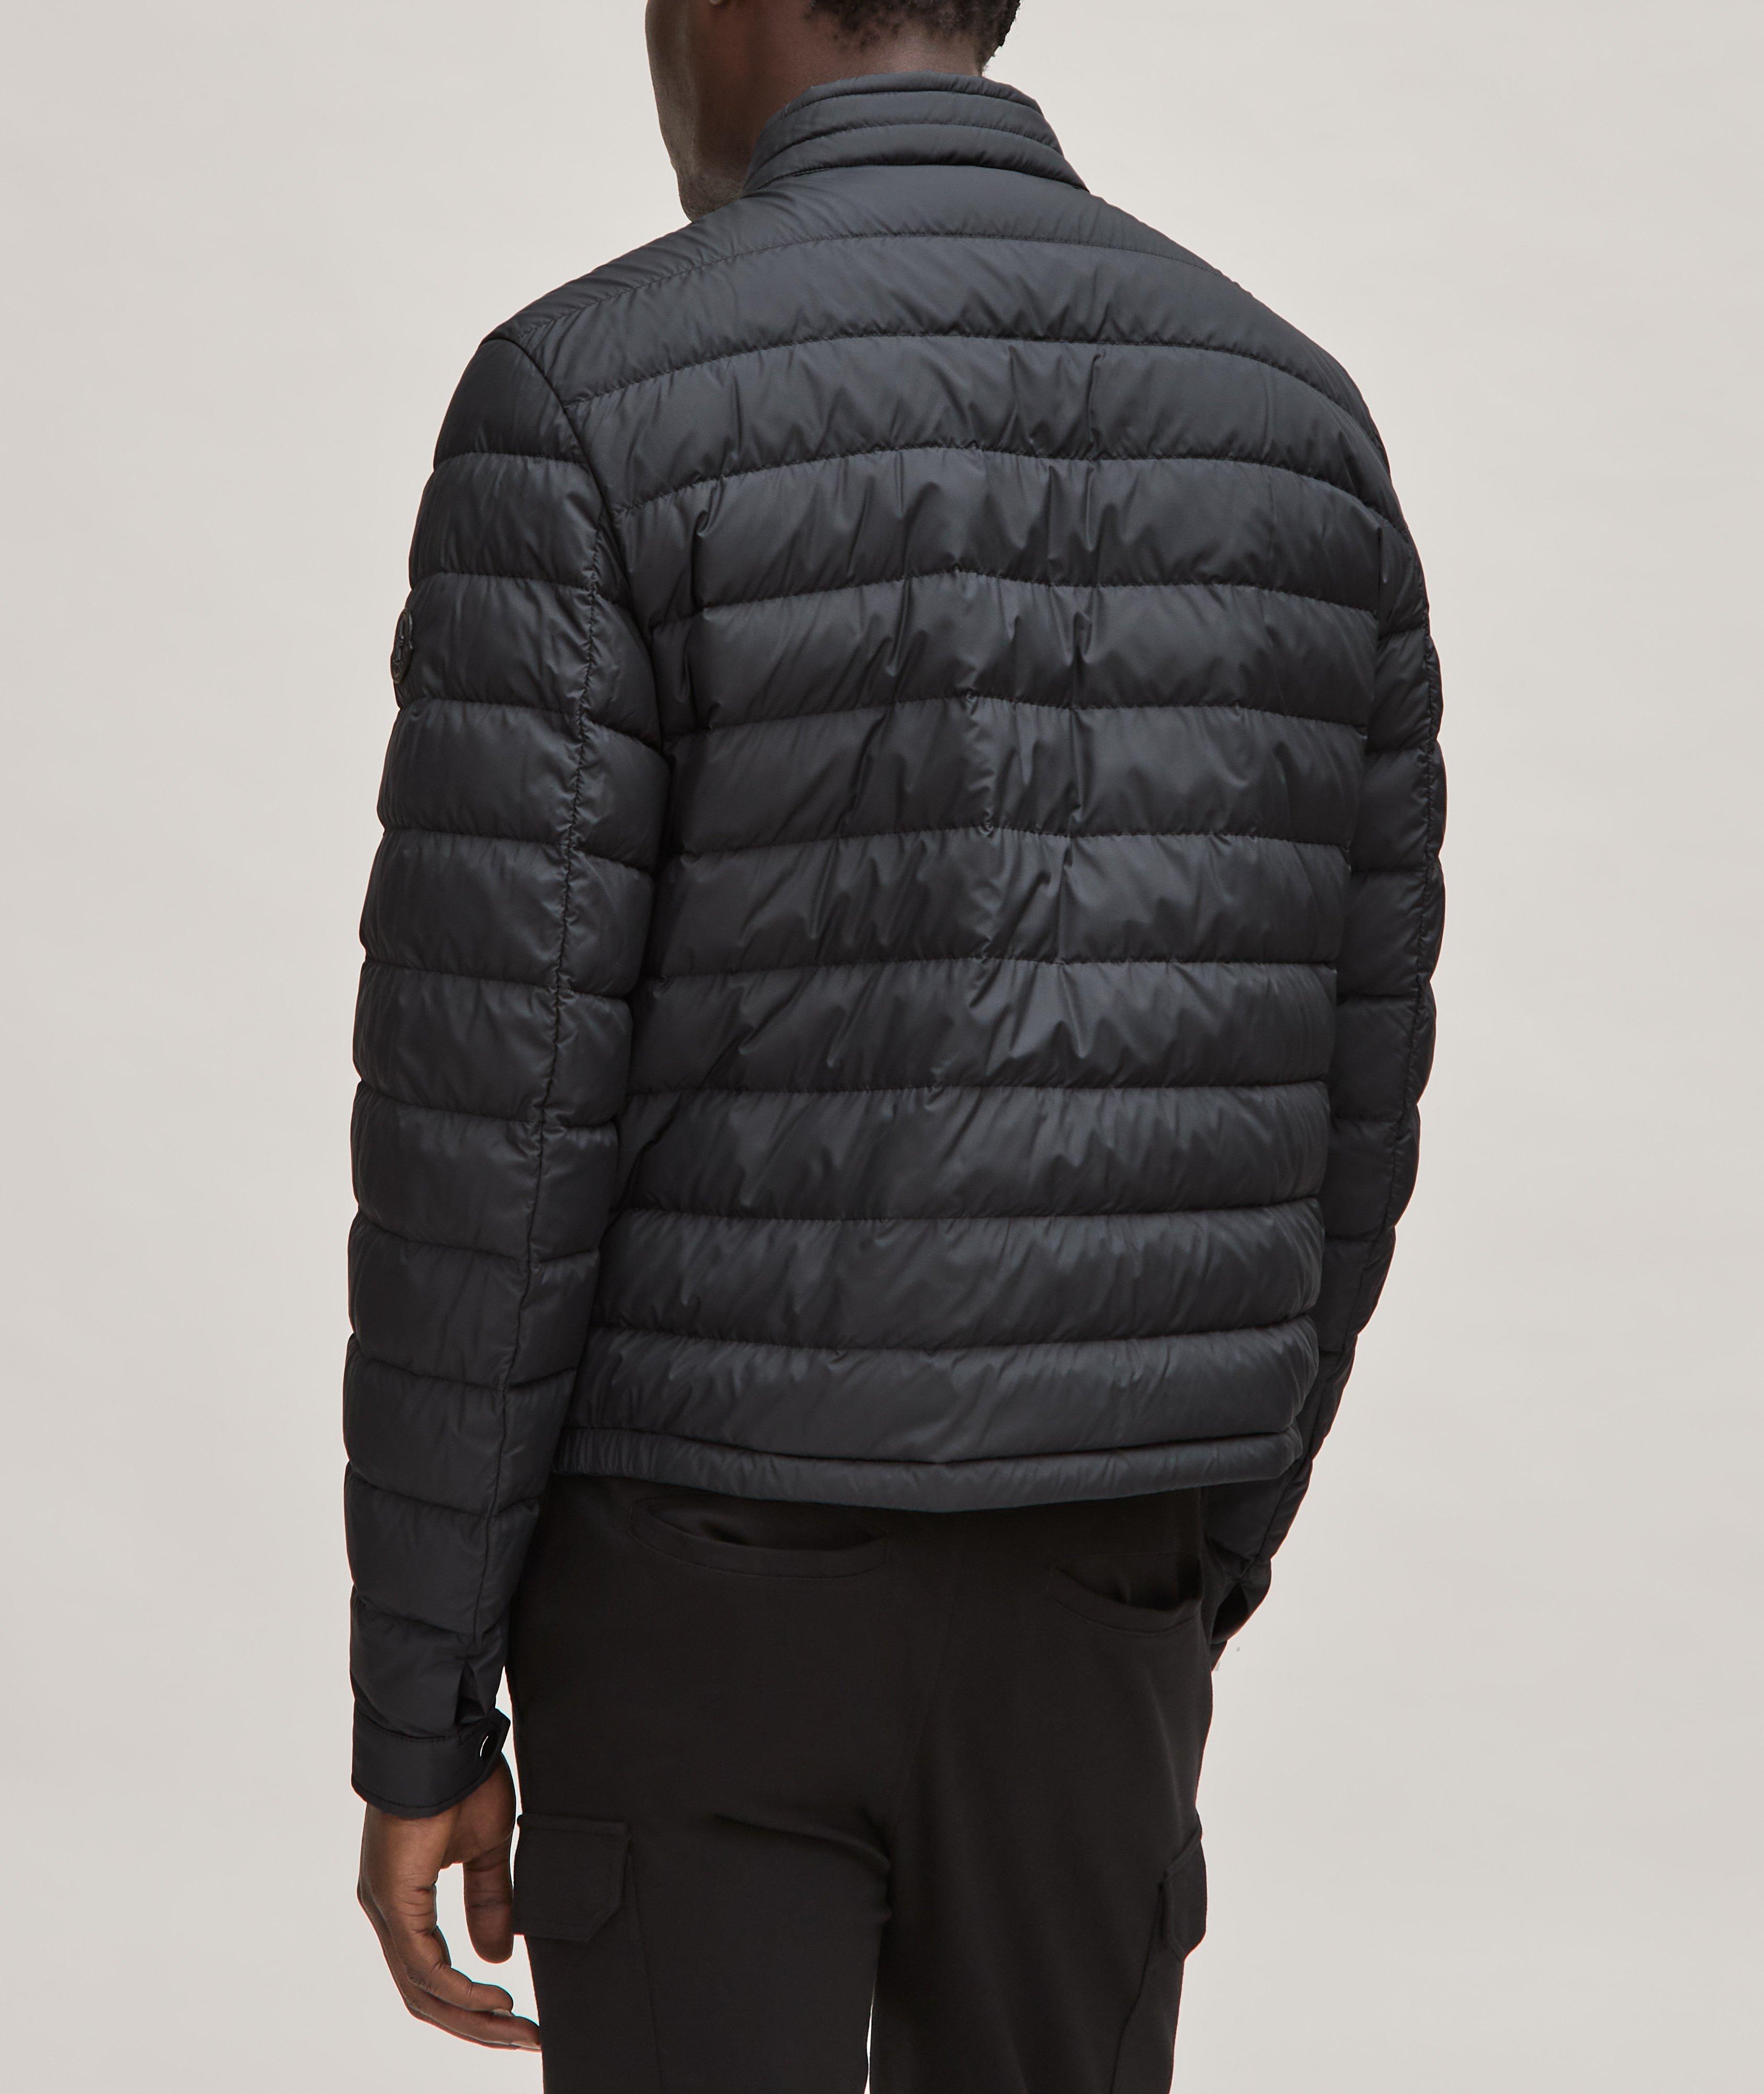 Maurienne Quilted Jacket image 2